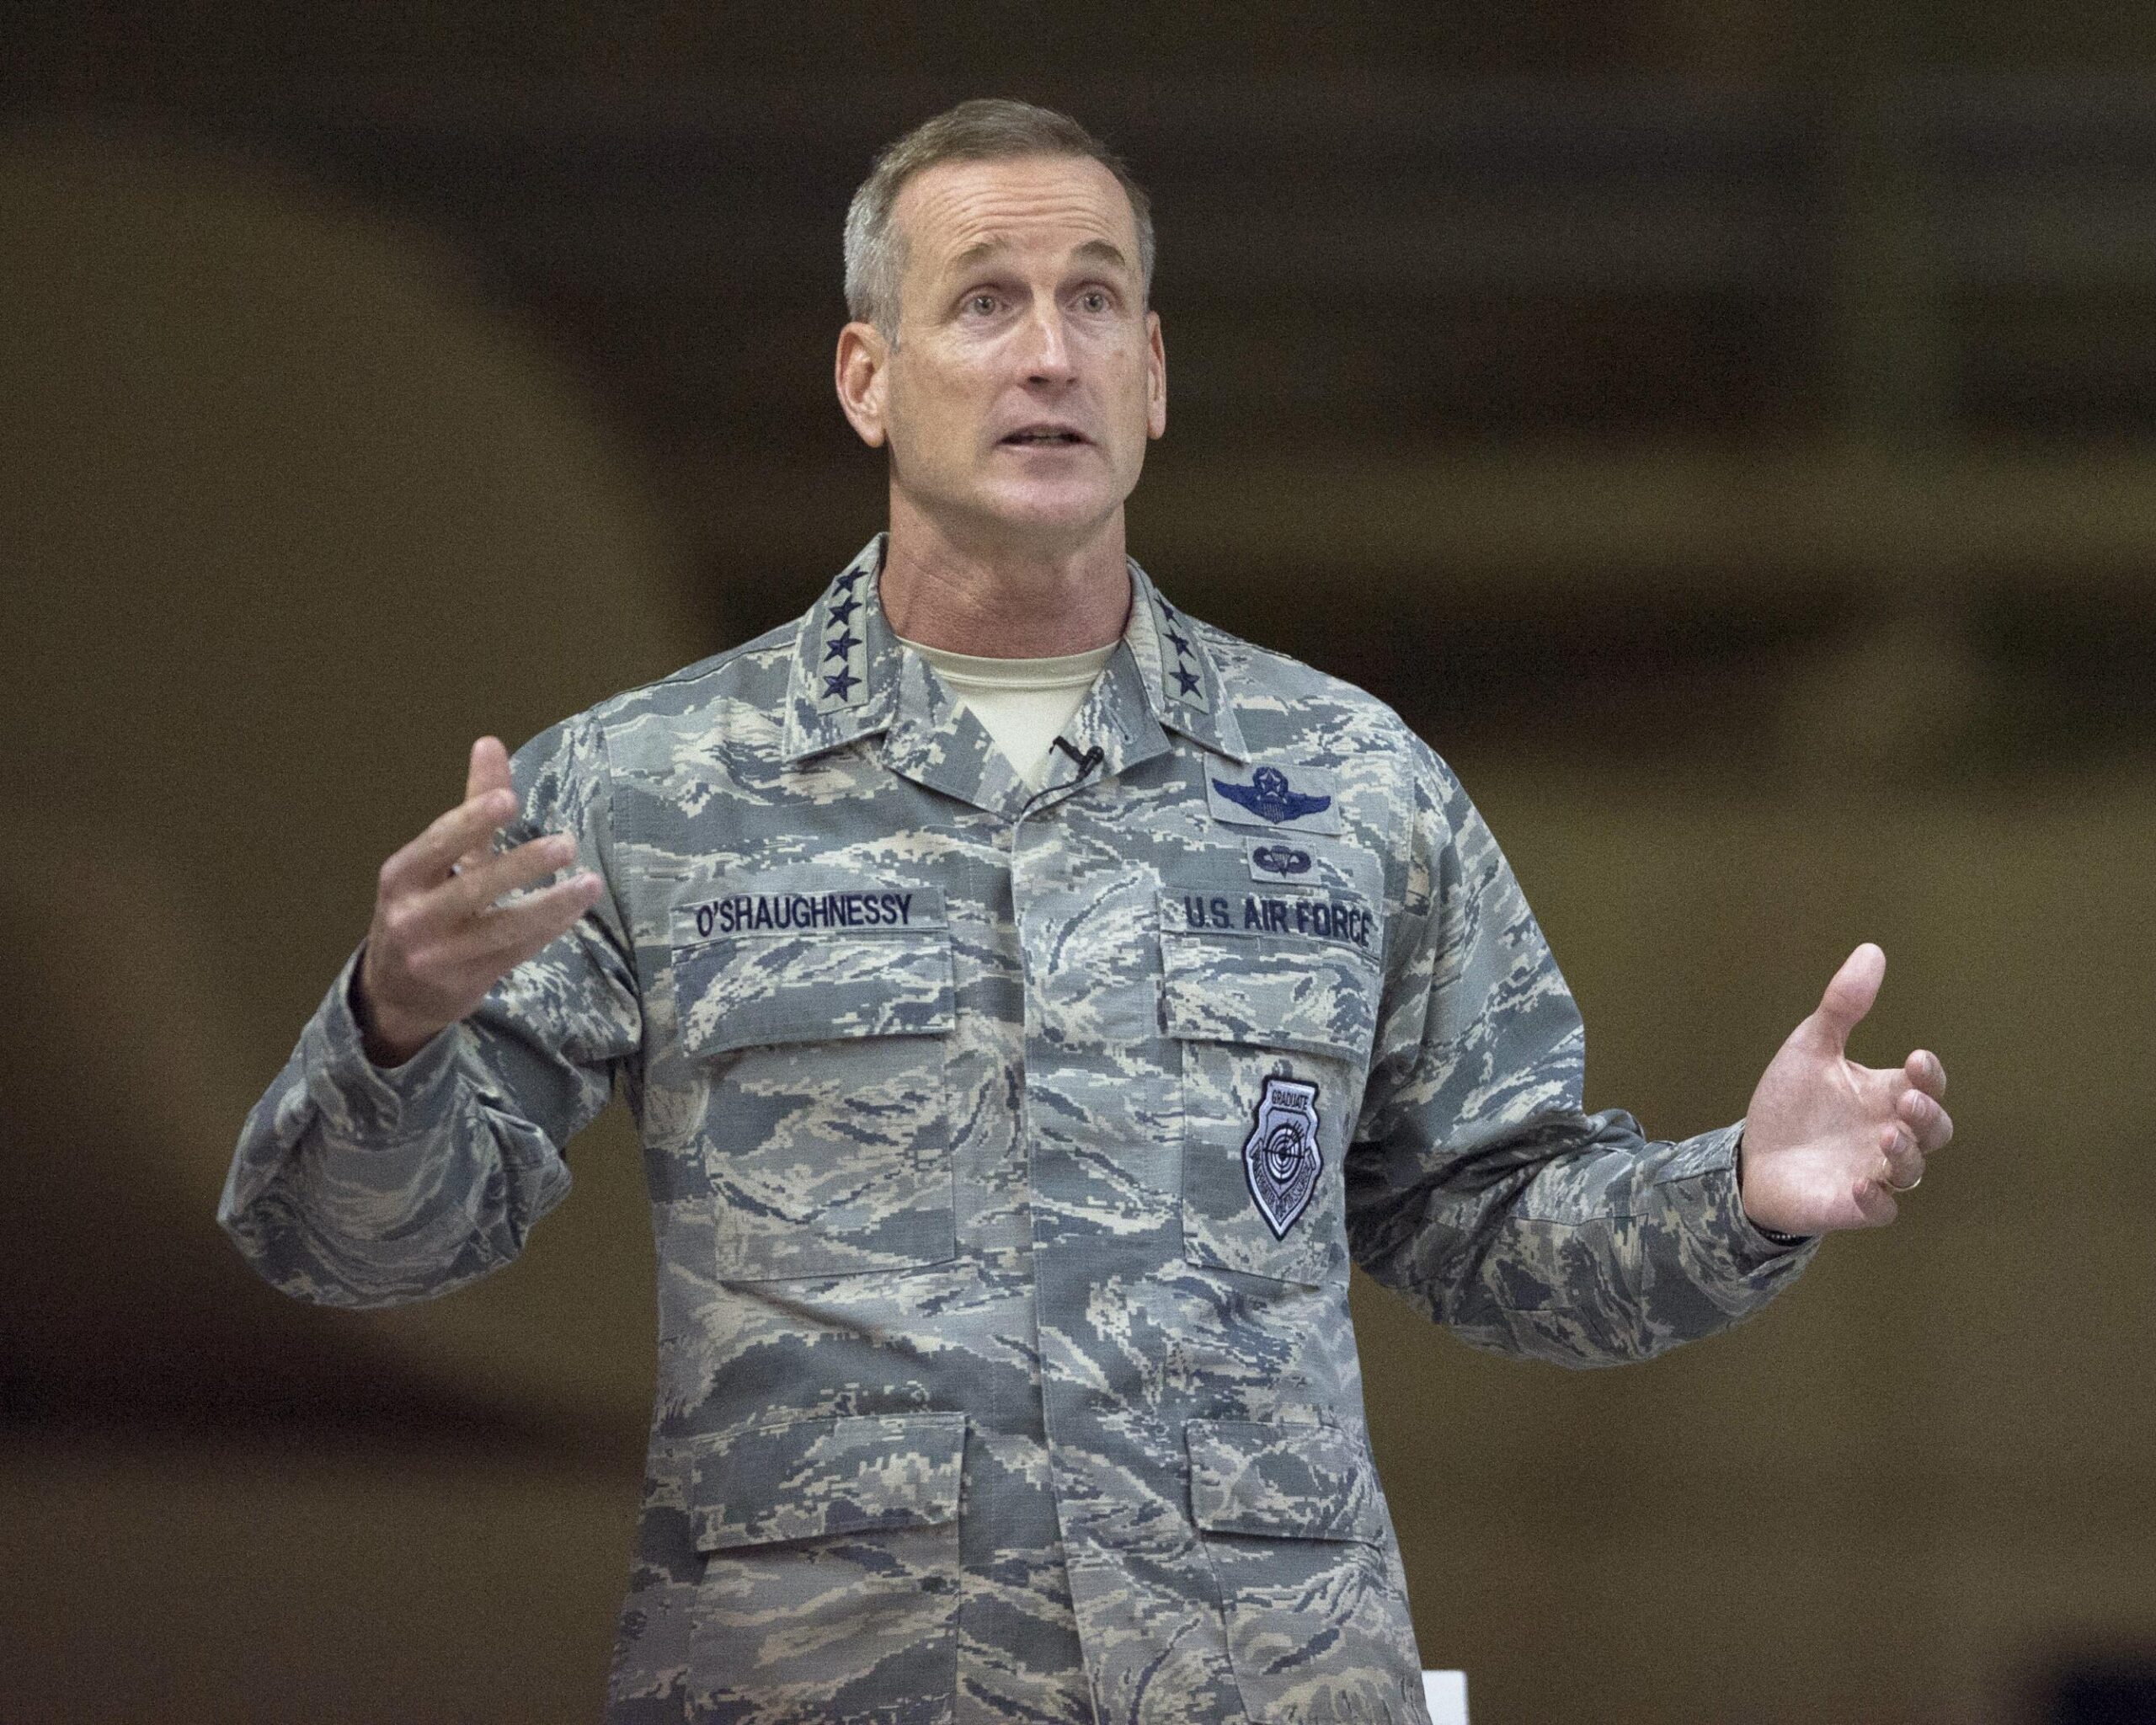 The Key To All-Domain Warfare Is ‘Predictive Analysis:’ Gen. O’Shaughnessy